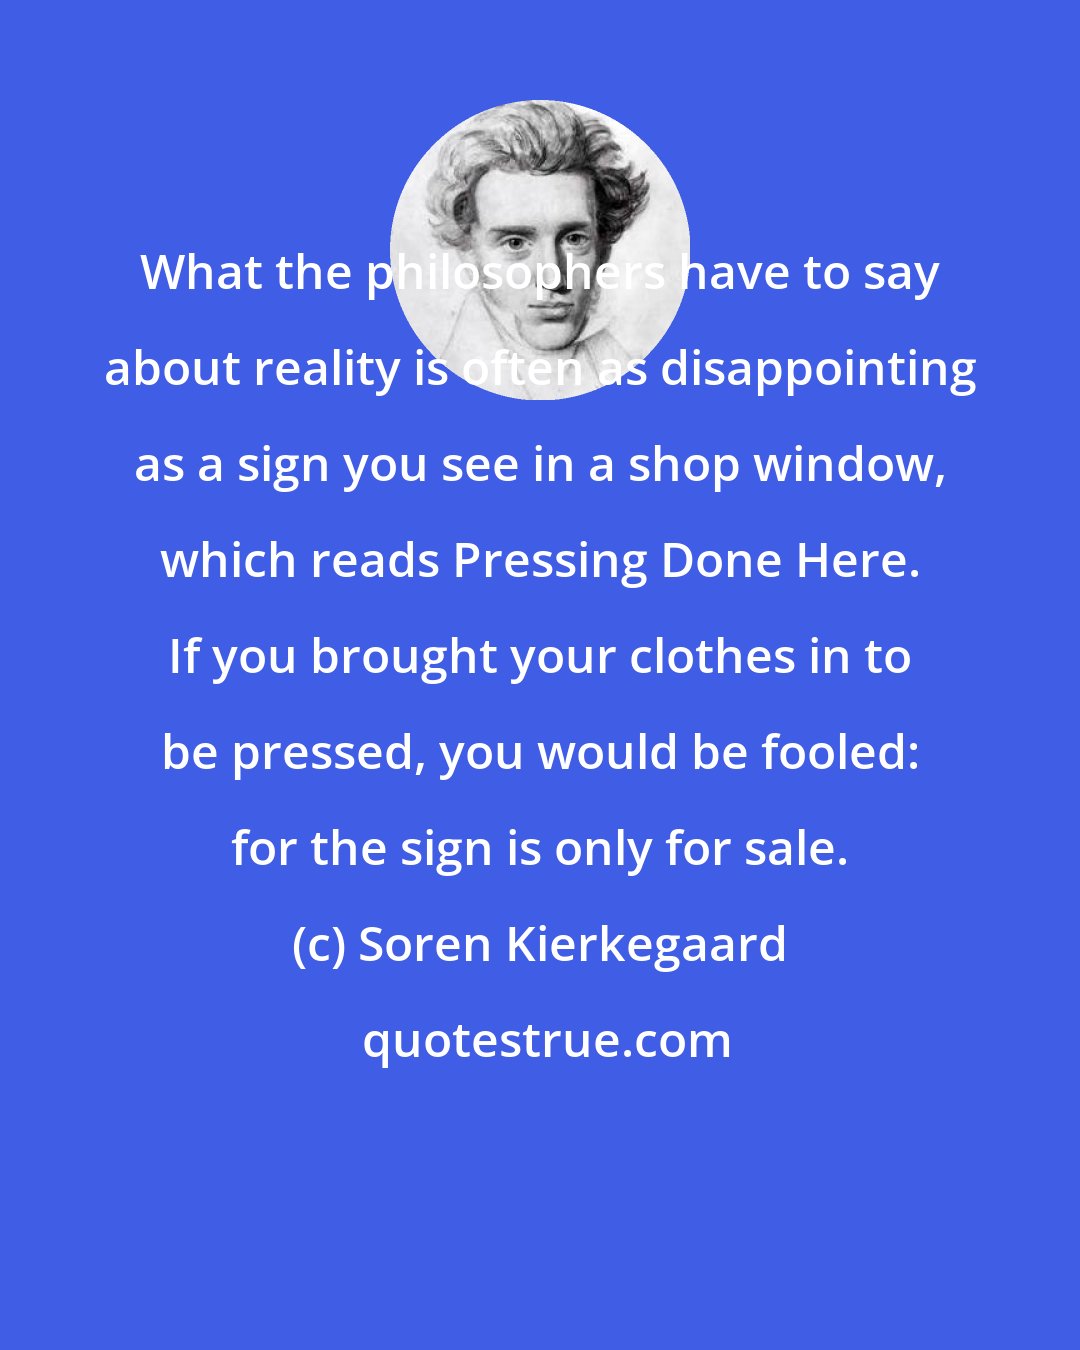 Soren Kierkegaard: What the philosophers have to say about reality is often as disappointing as a sign you see in a shop window, which reads Pressing Done Here. If you brought your clothes in to be pressed, you would be fooled: for the sign is only for sale.